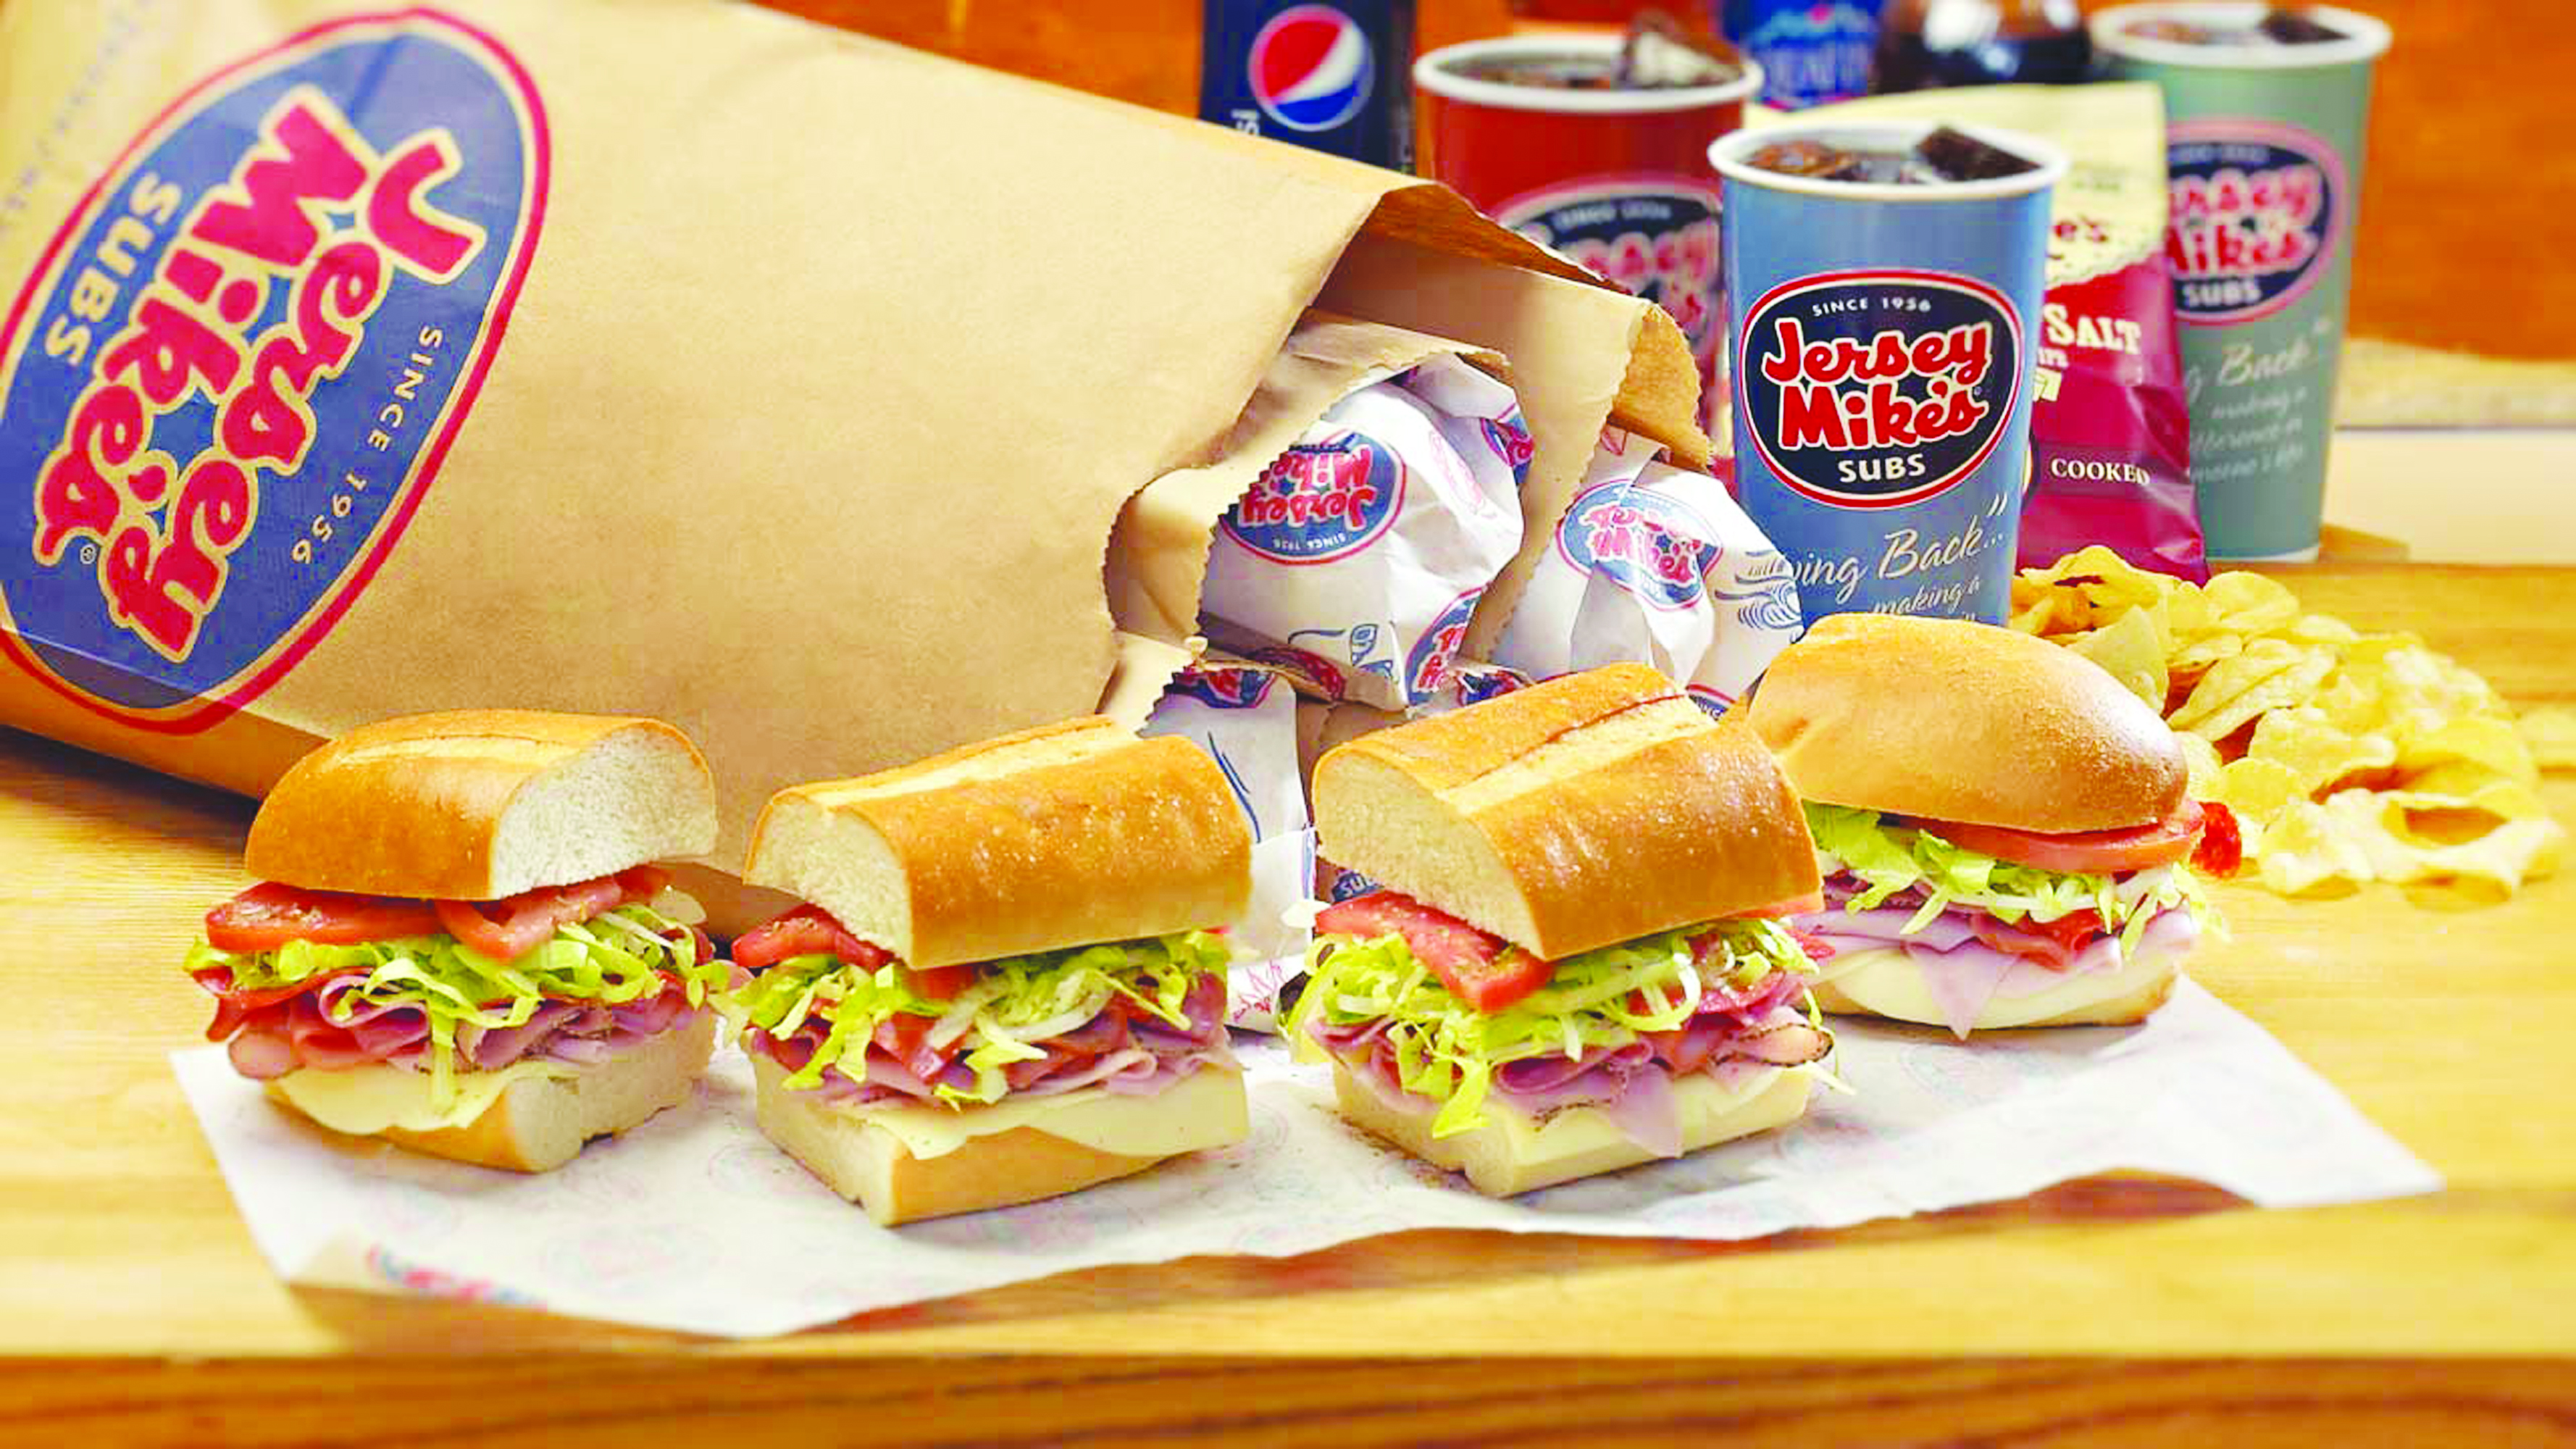 what time does jersey mike's close today